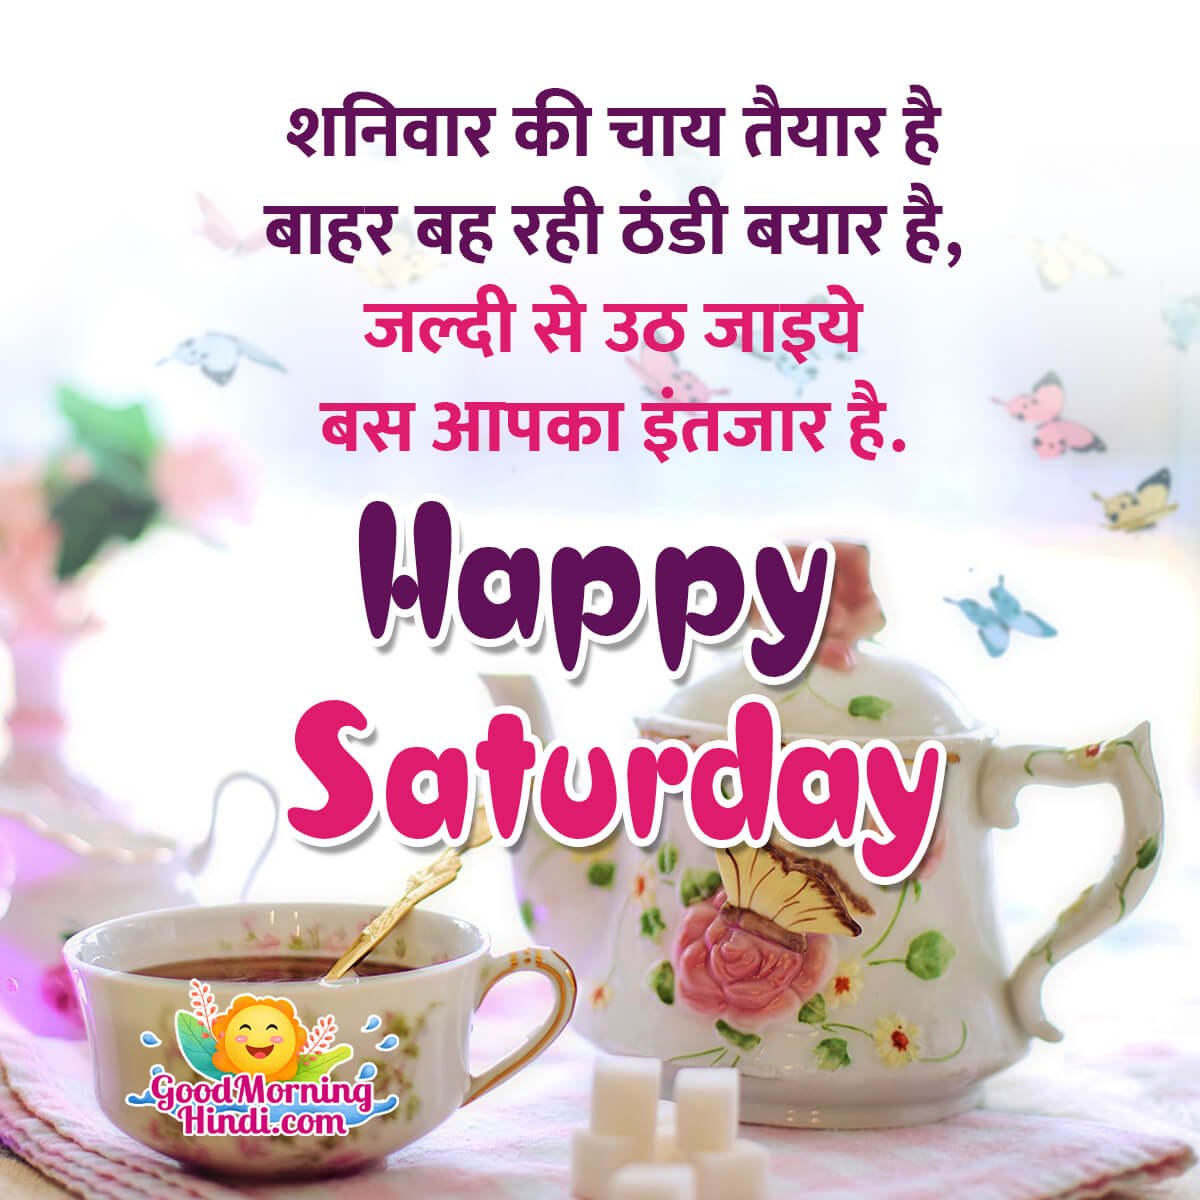 Happy Saturday Messages In Hindi